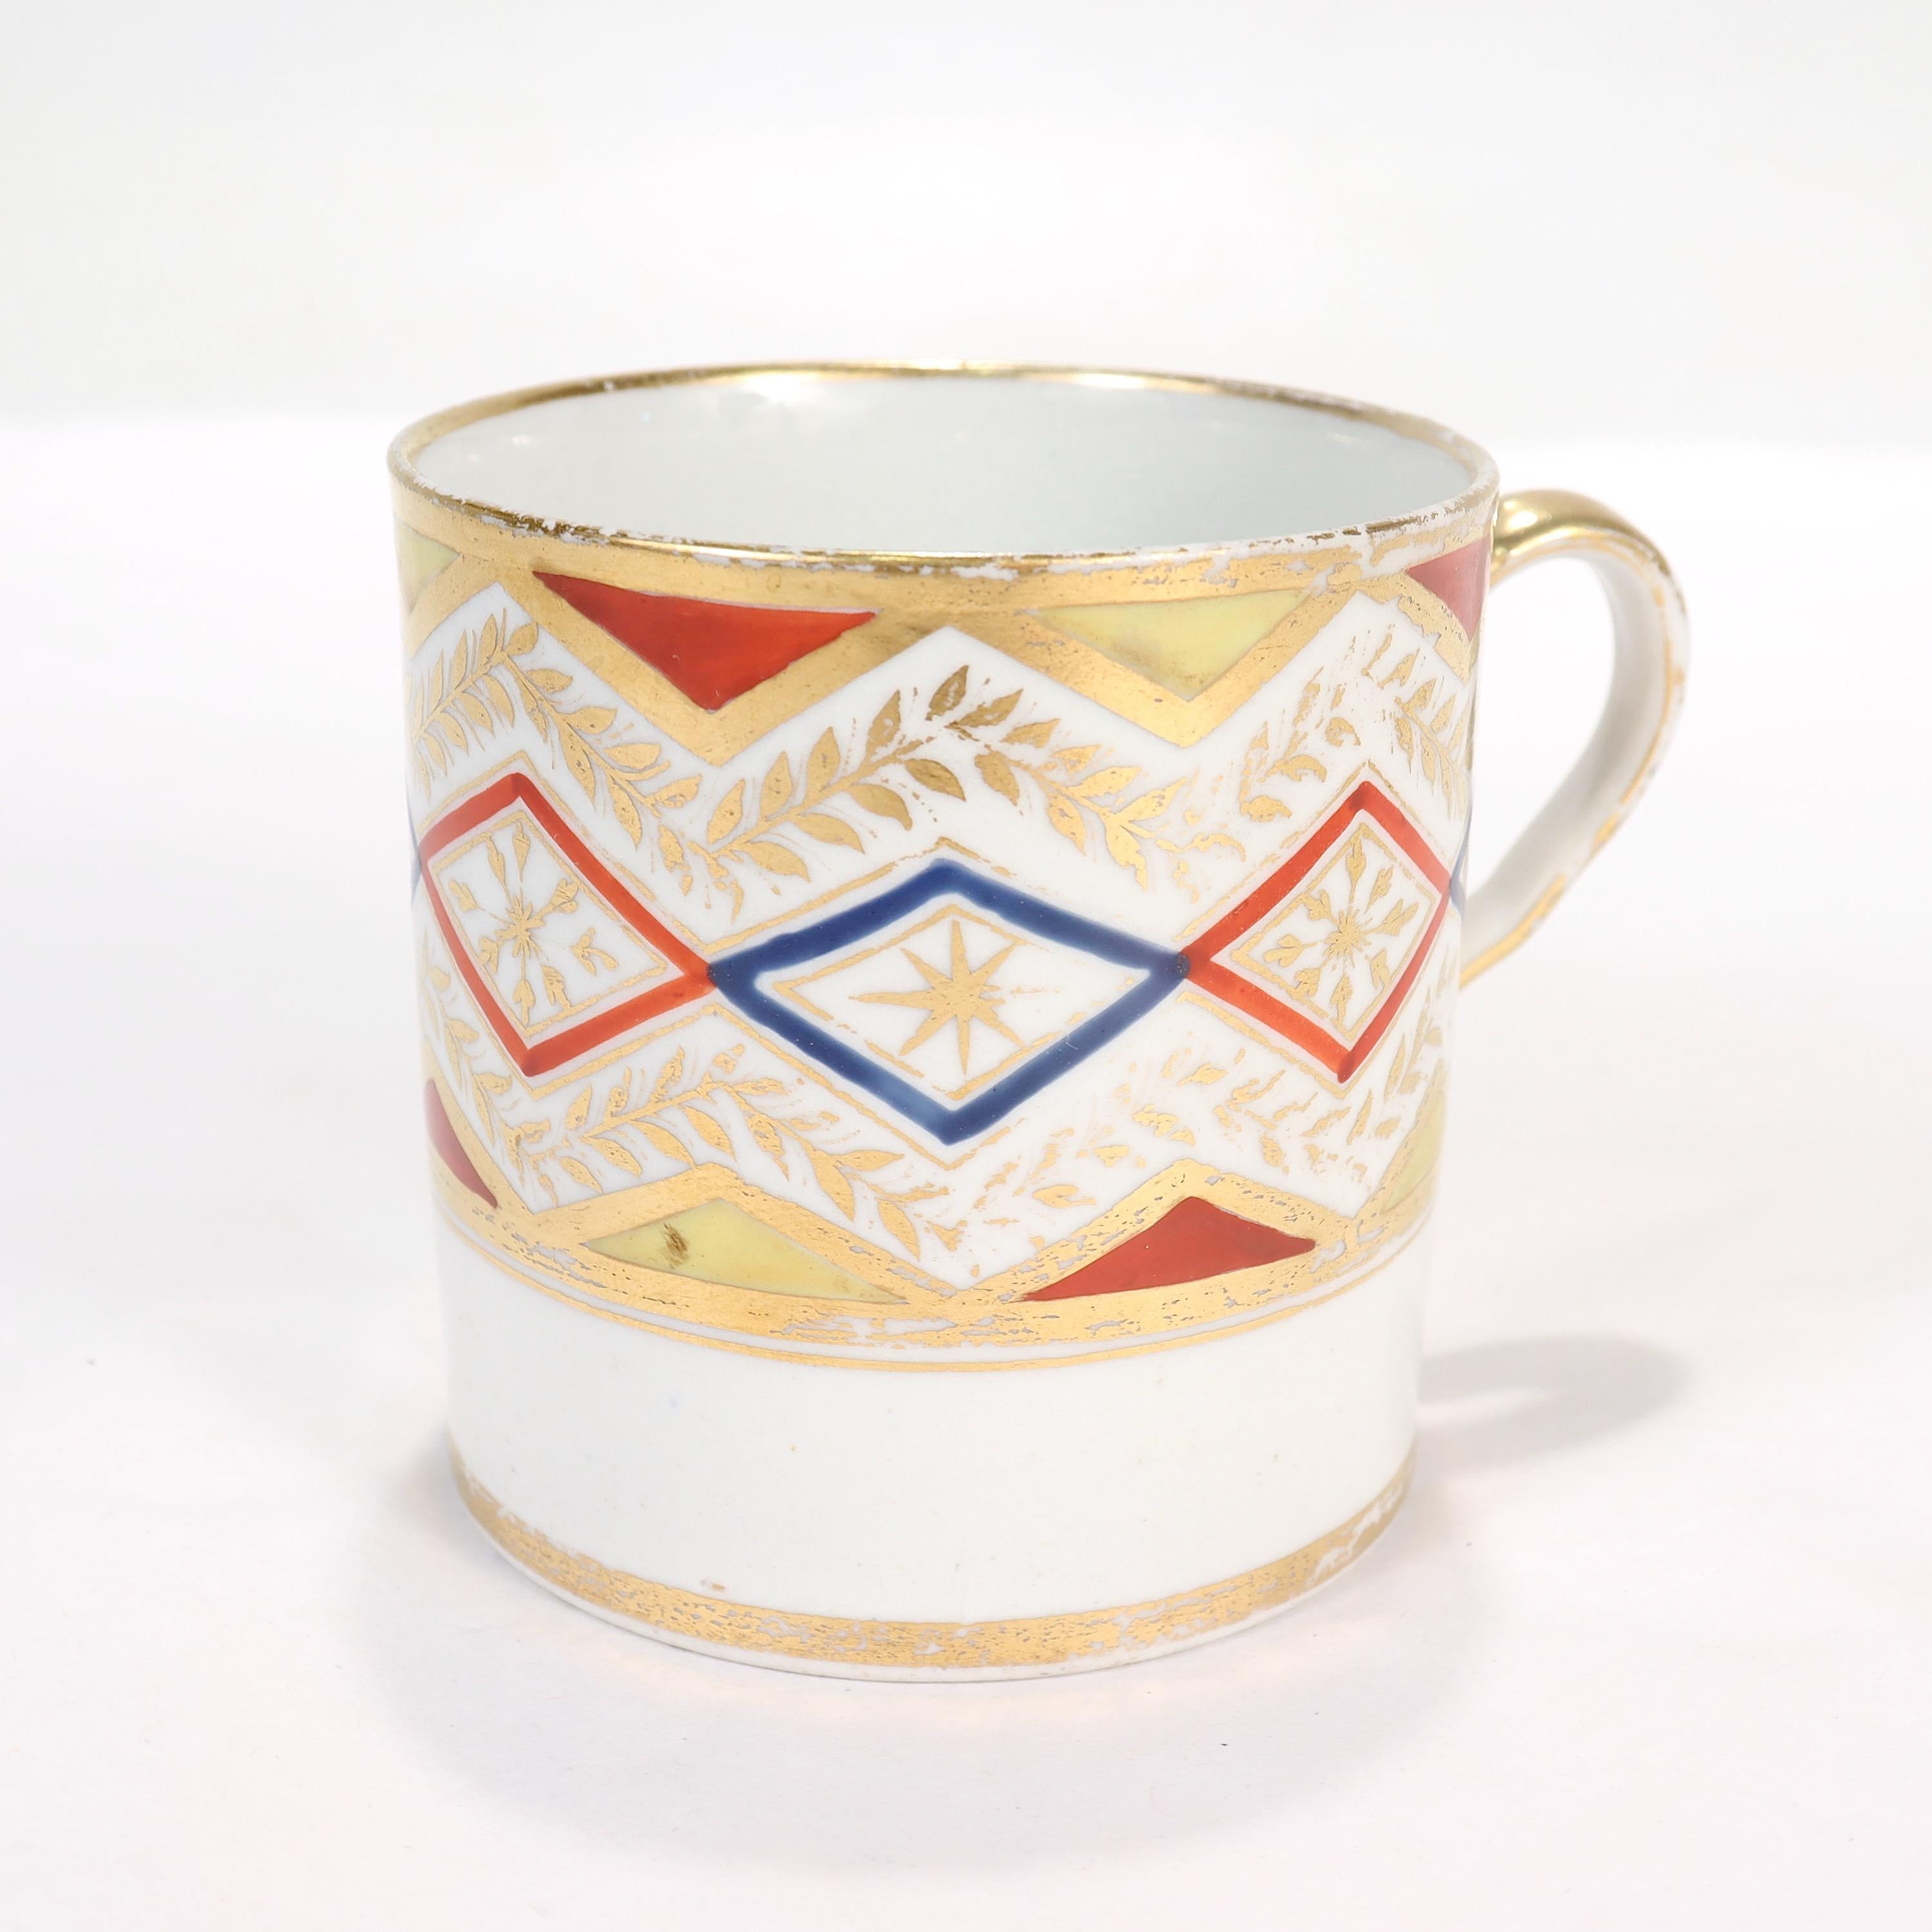 A fine English Neoclassical porcelain coffee cup

By Coalport.

Decorated throughout with alternating red and blue geometric patterns, gilt garlands, and gilt highlights in general.

Simply a great Coalport porcelain coffee cup!

Date:
19th Century,